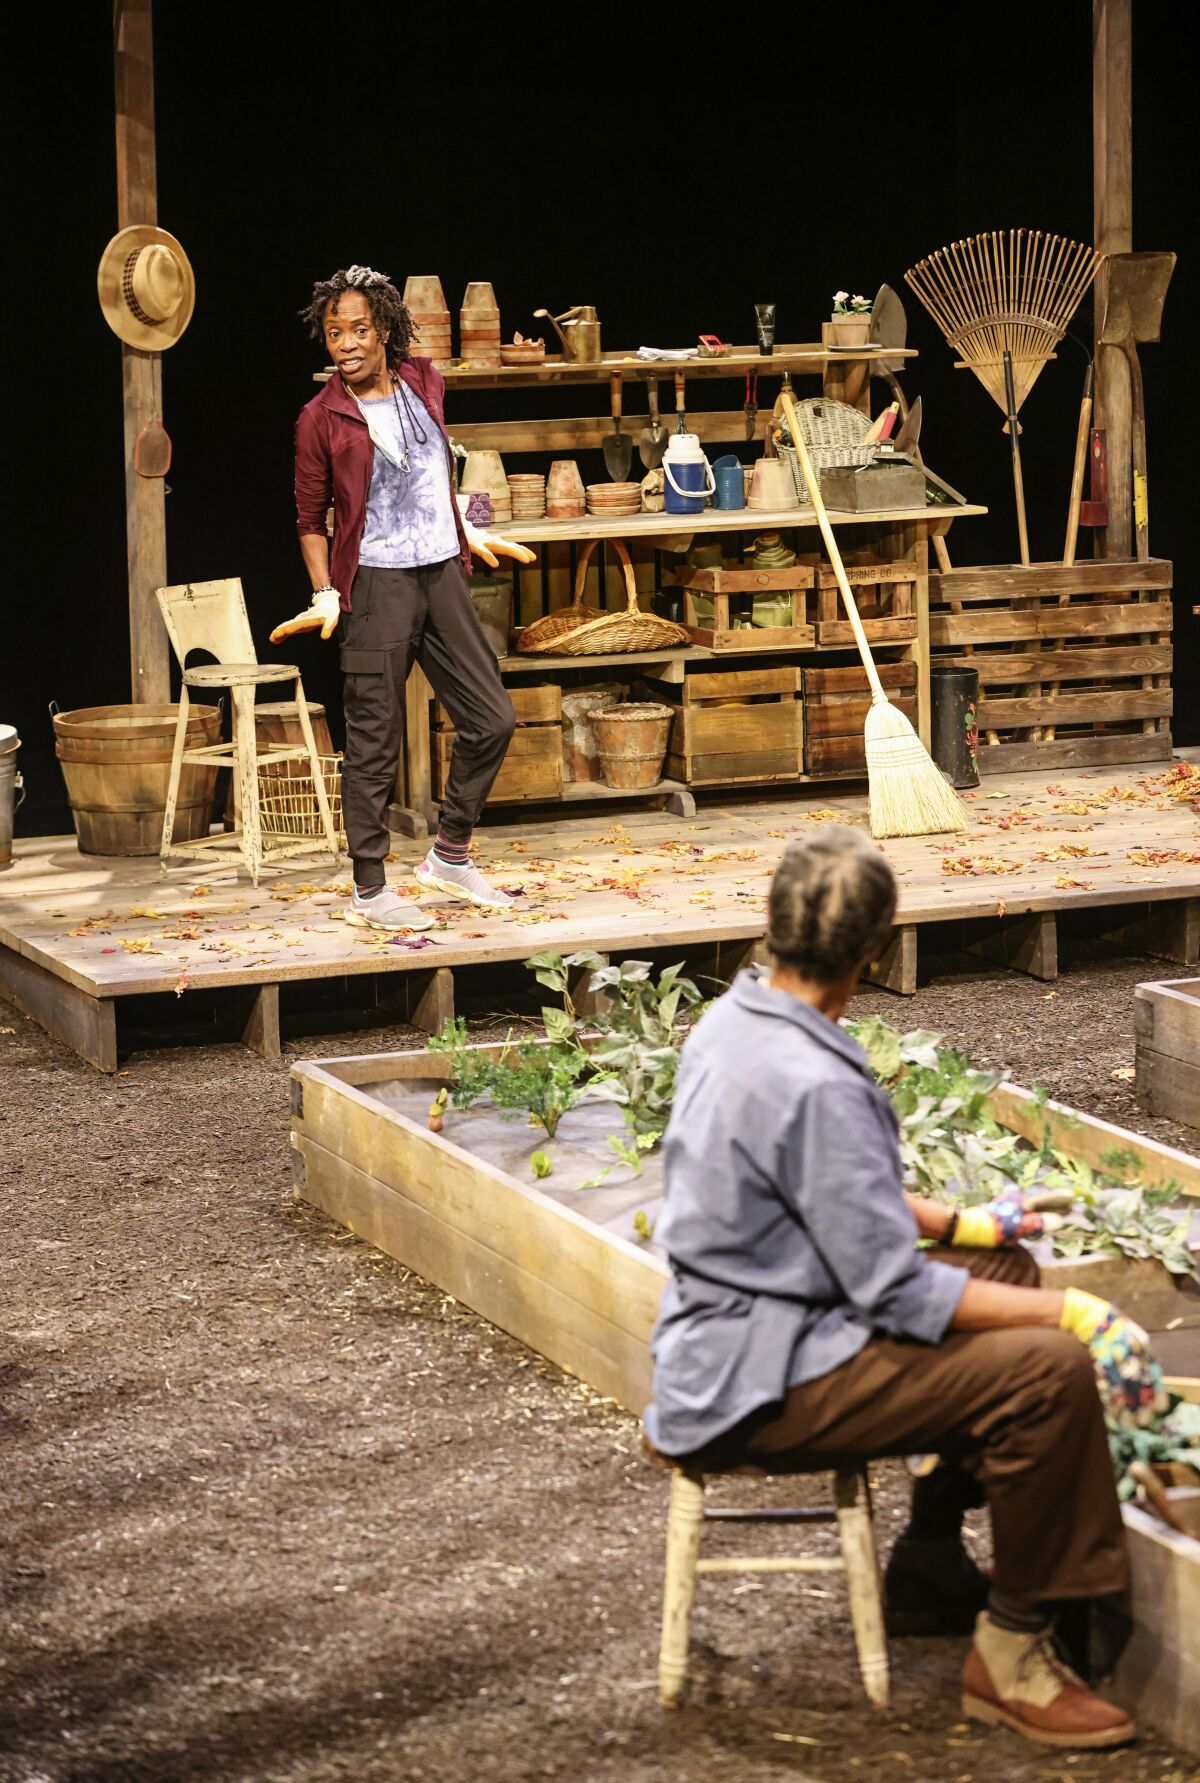 Charlayne Woodard (left) and Stephanie Berry rehearse a scene from "The Garden" at La Jolla Playhouse.